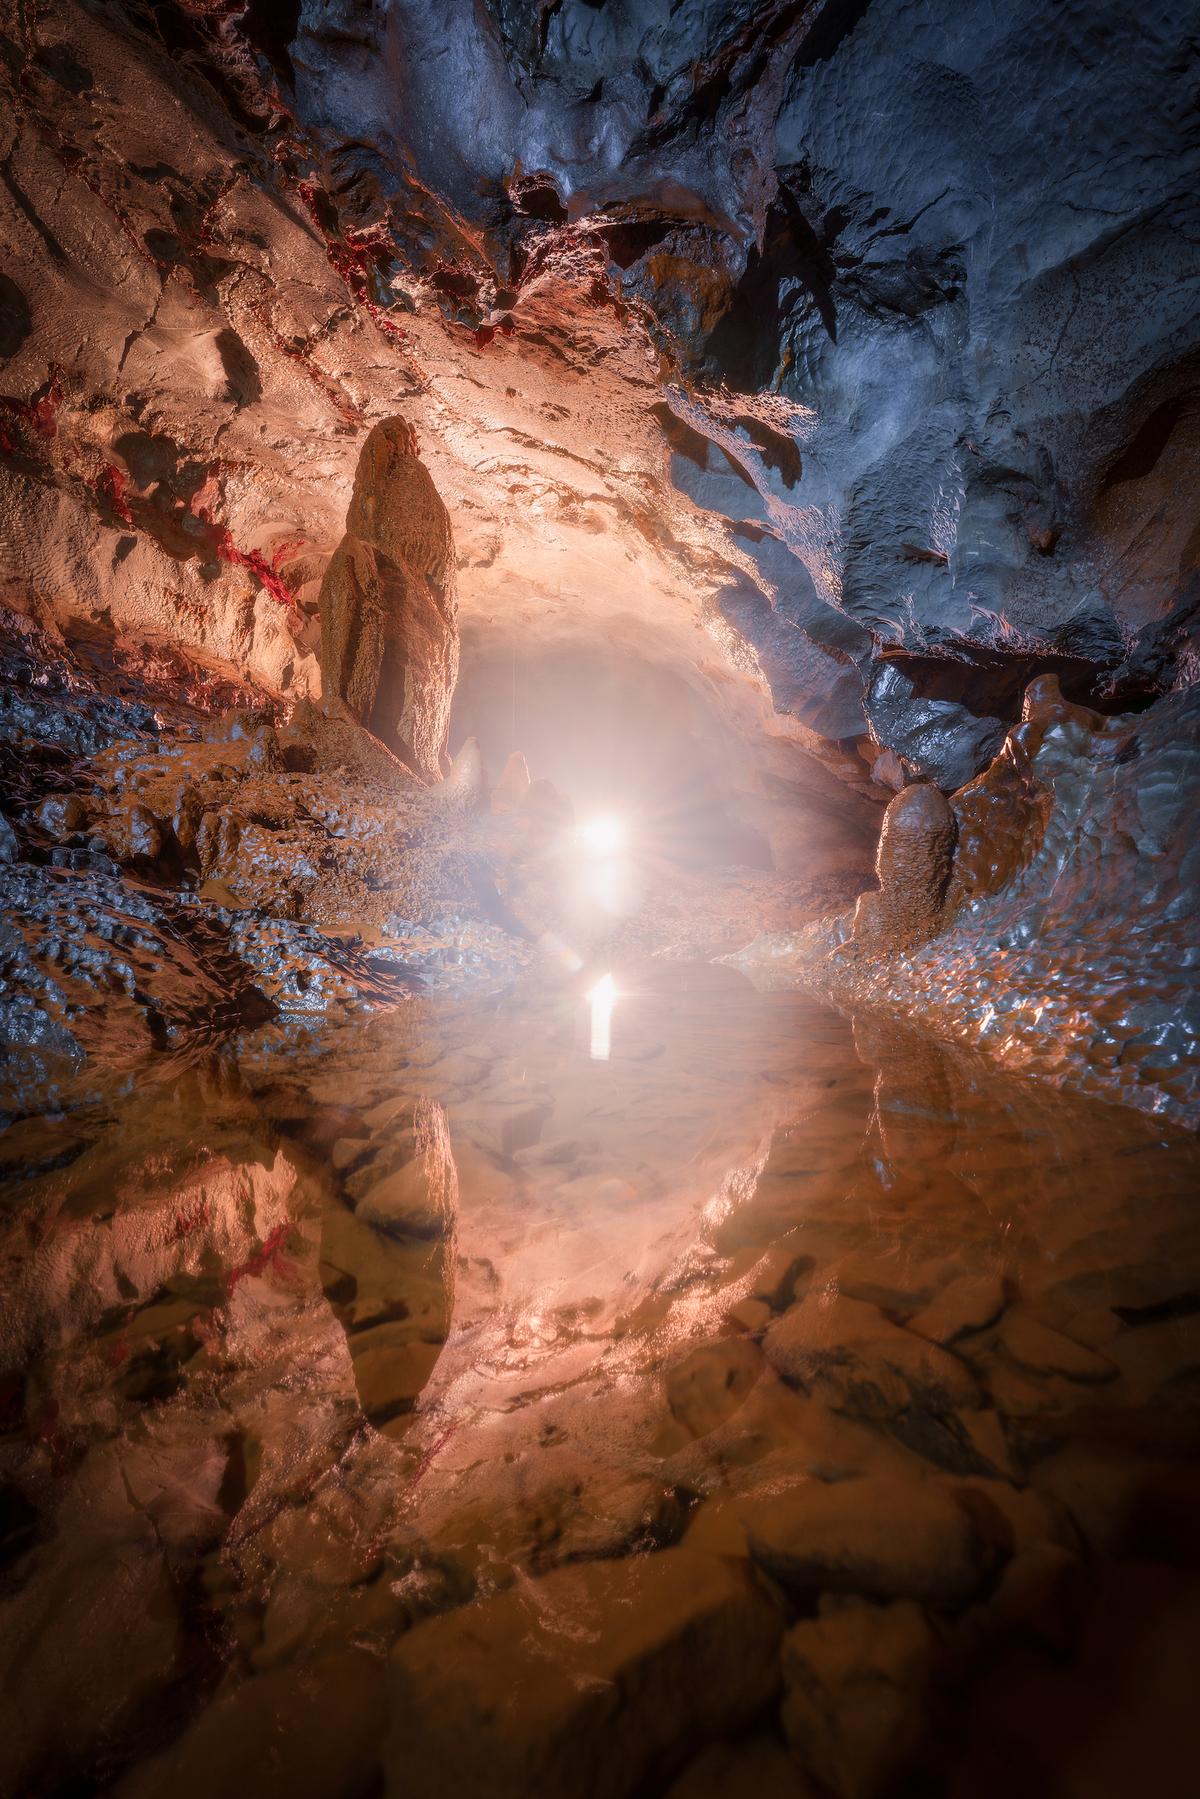 A spectacle seen inside Tron Cave. (Courtesy of Cao Ky Nhan via Jungle Boss Tours)